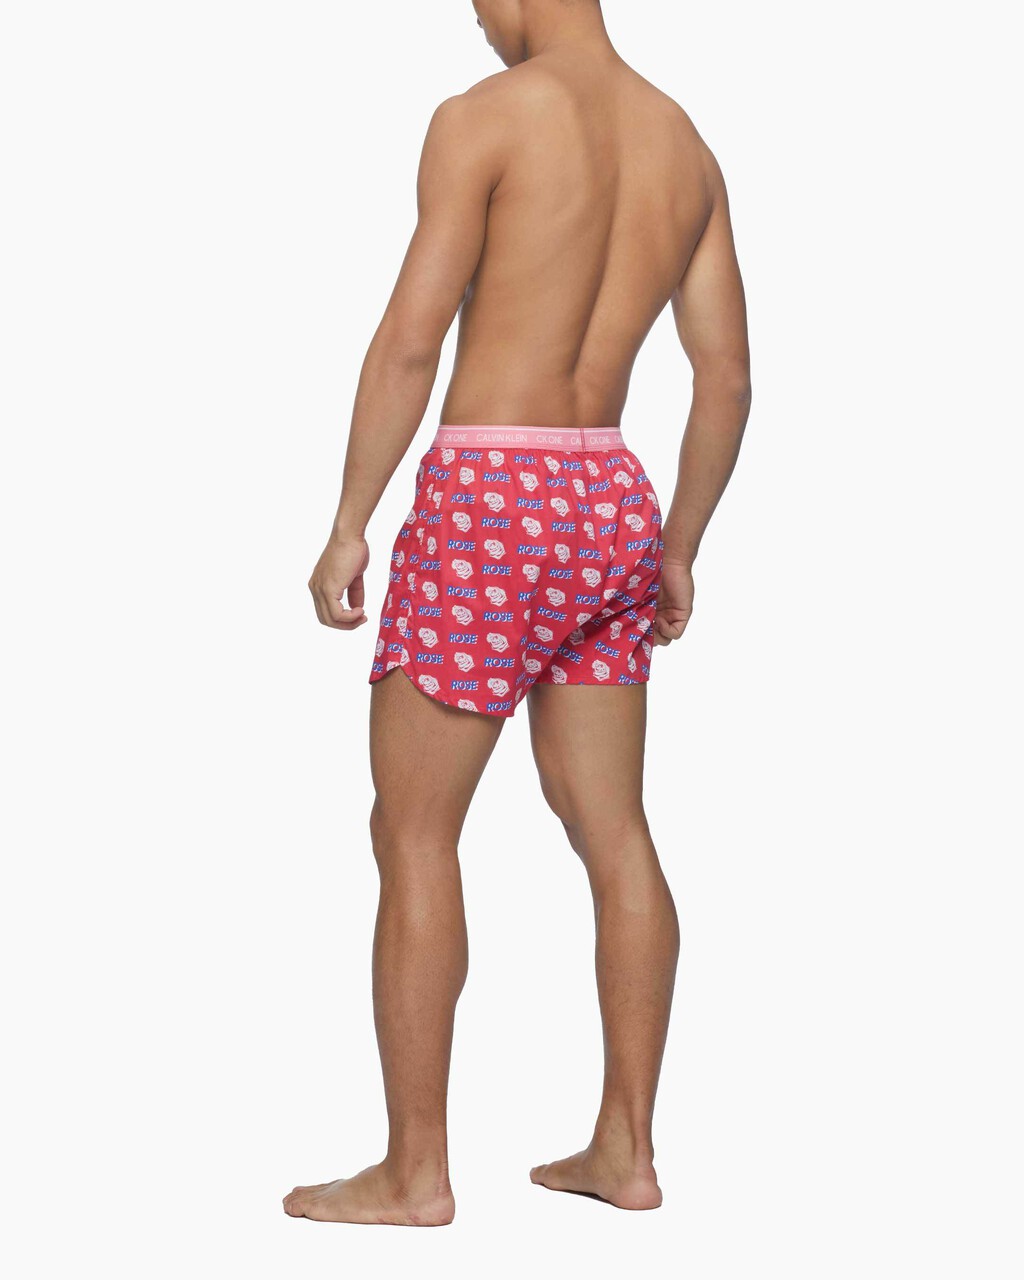 CK ONE WOVEN BOXERS, RS WD SH_BM, hi-res